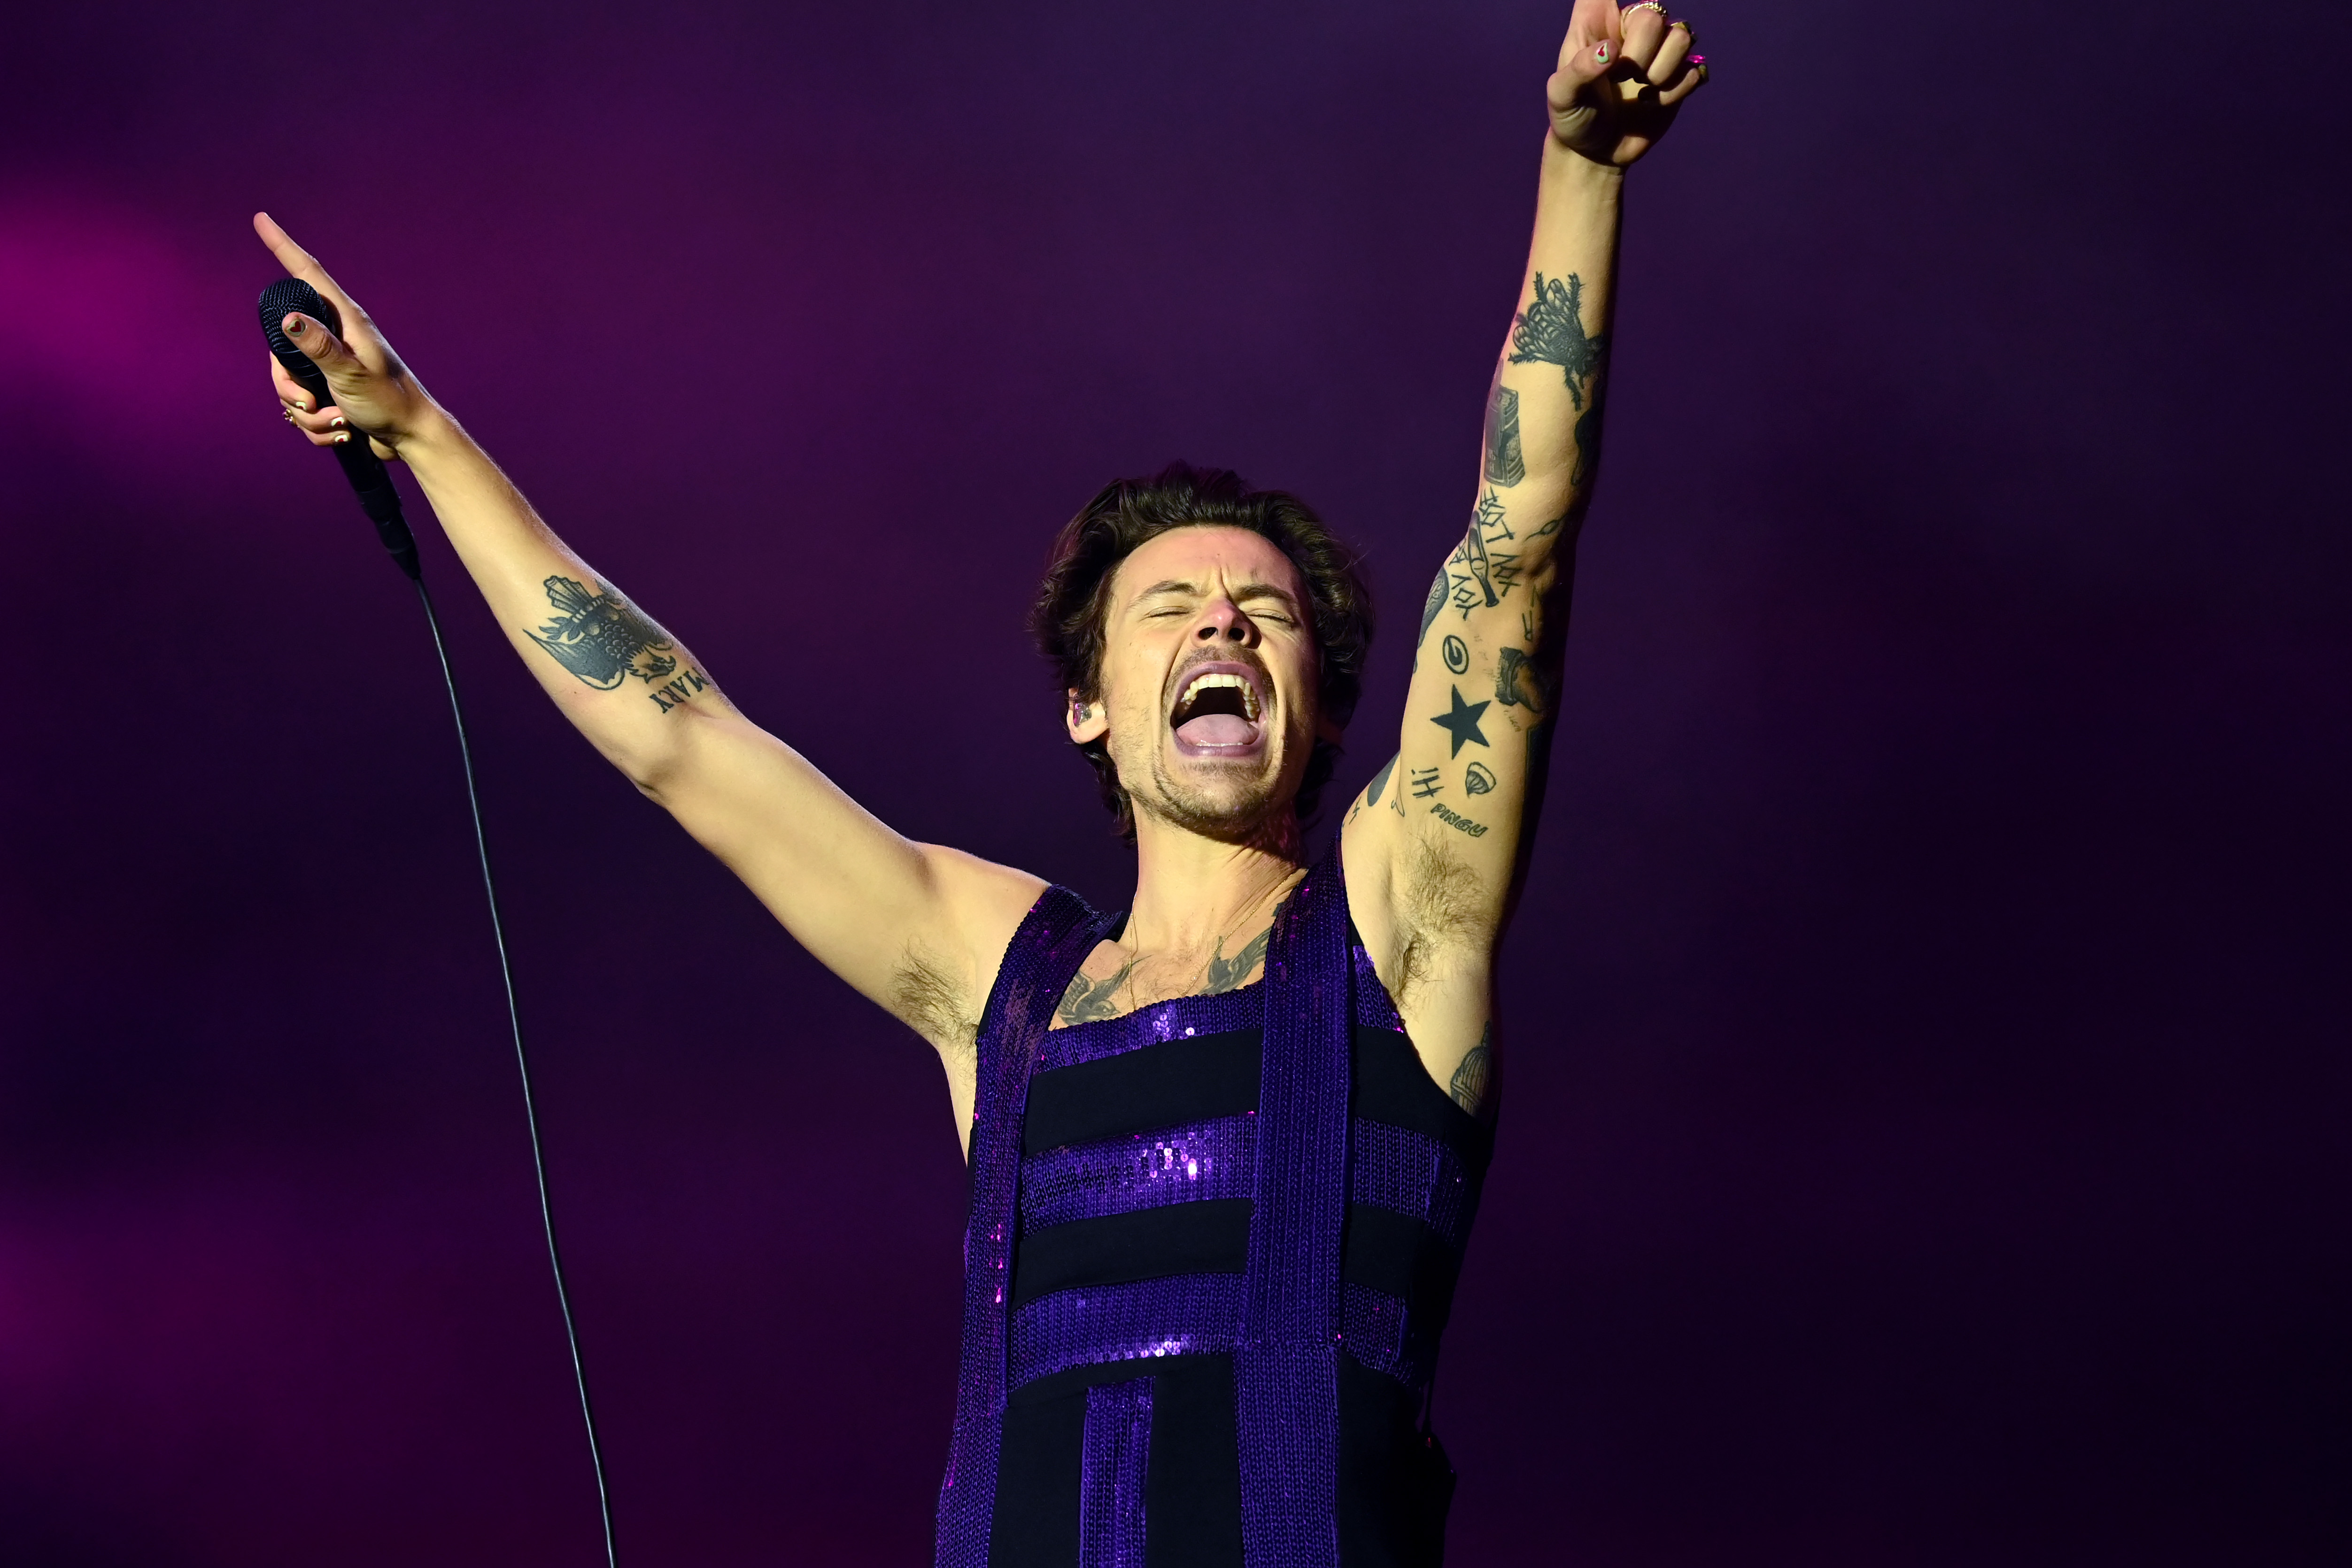 'Harry's House' artist Harry Styles performing, with his arms raised and holding a microphone